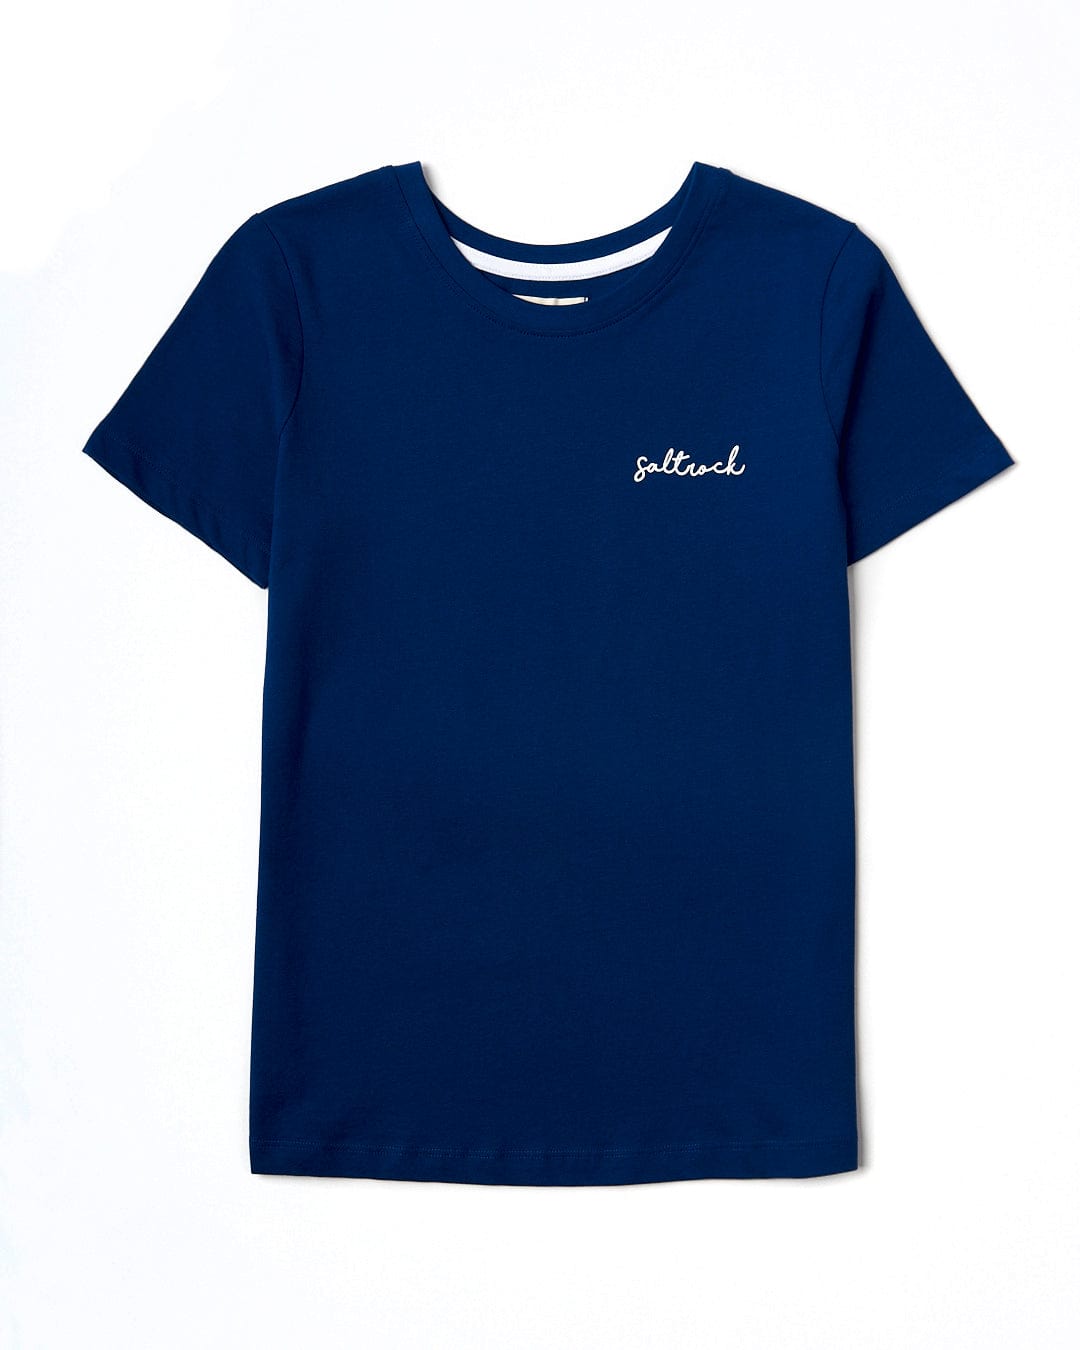 A Velator - Womens Short Sleeve T-Shirt - Navy from the Saltrock brand with the word 'salem' embroidered on it.